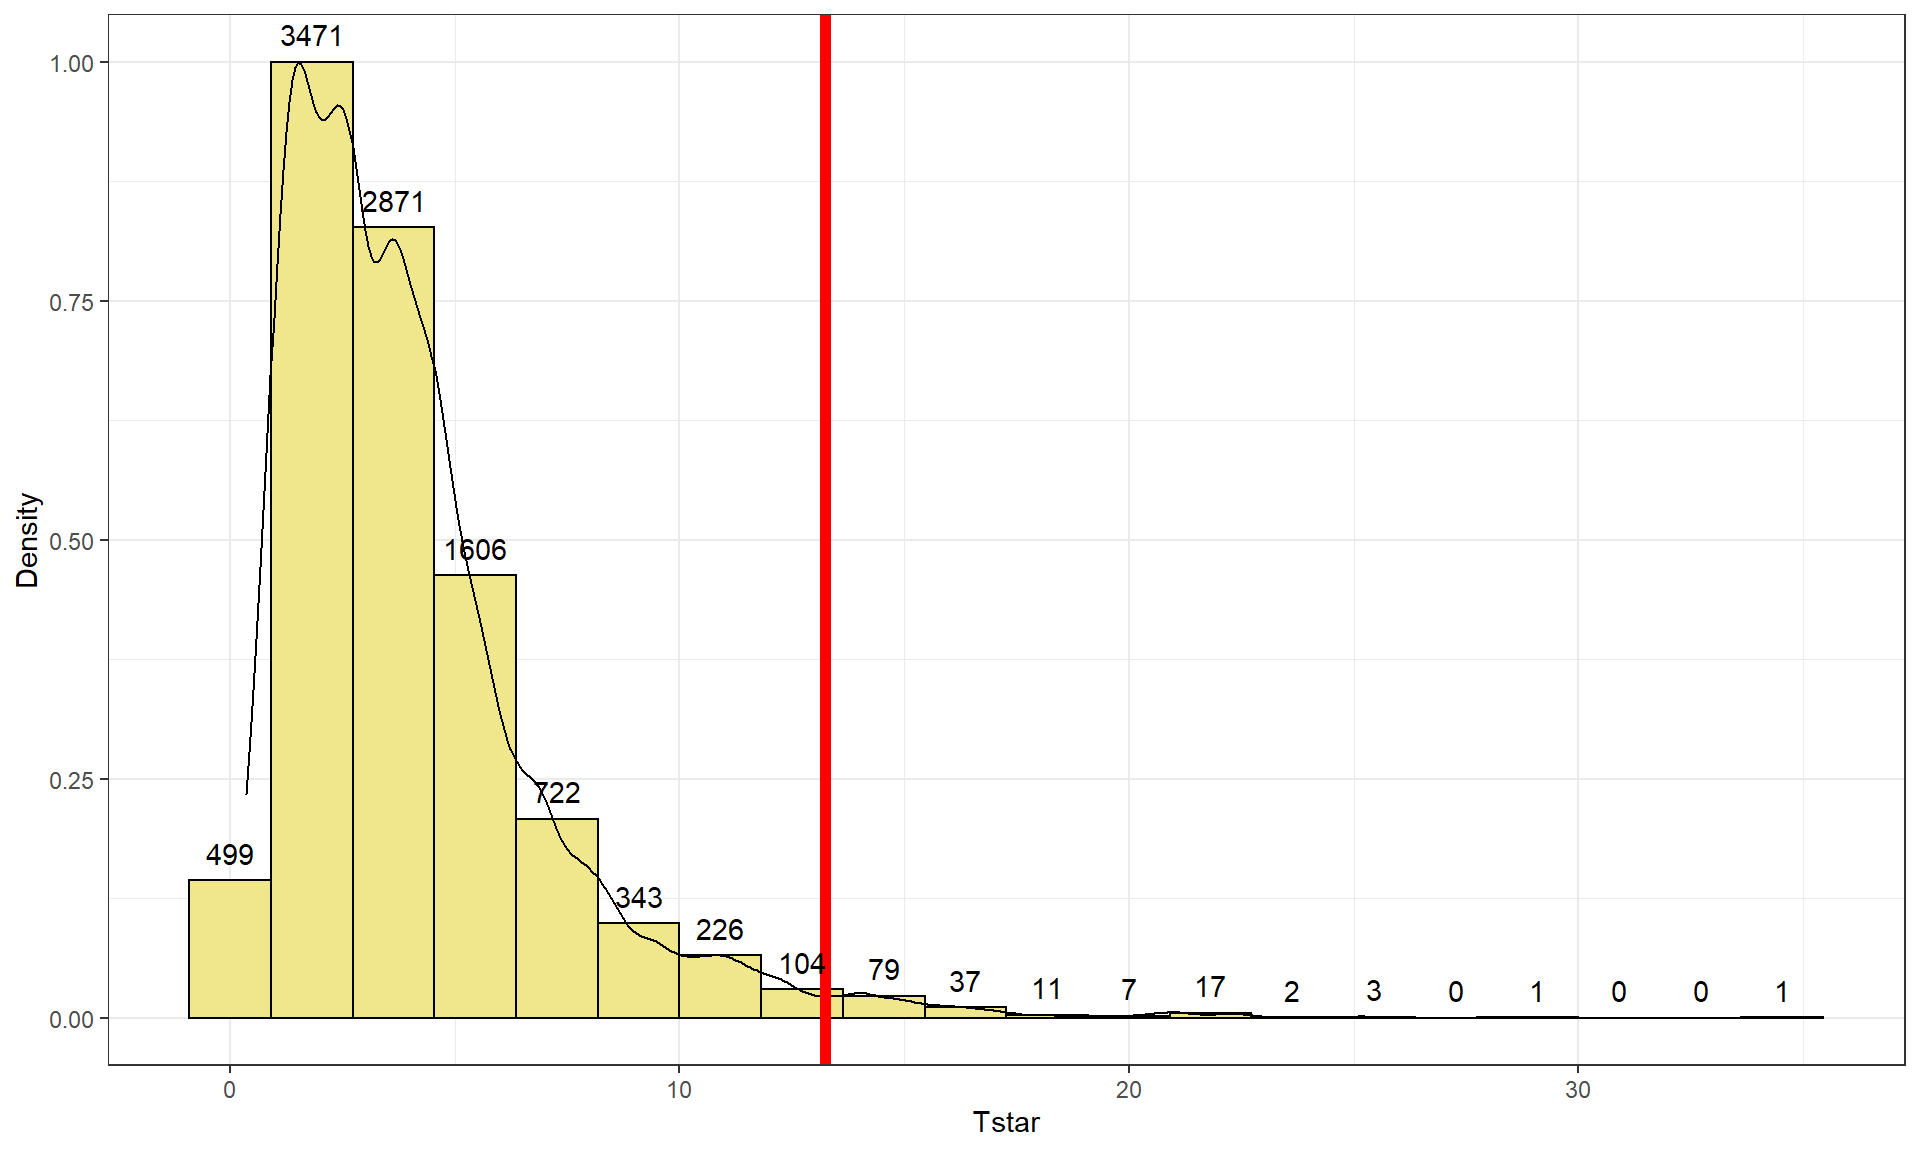 Plot of permutation distributions for cheat/lie results with observed value of 13.24 (bold, vertical line).